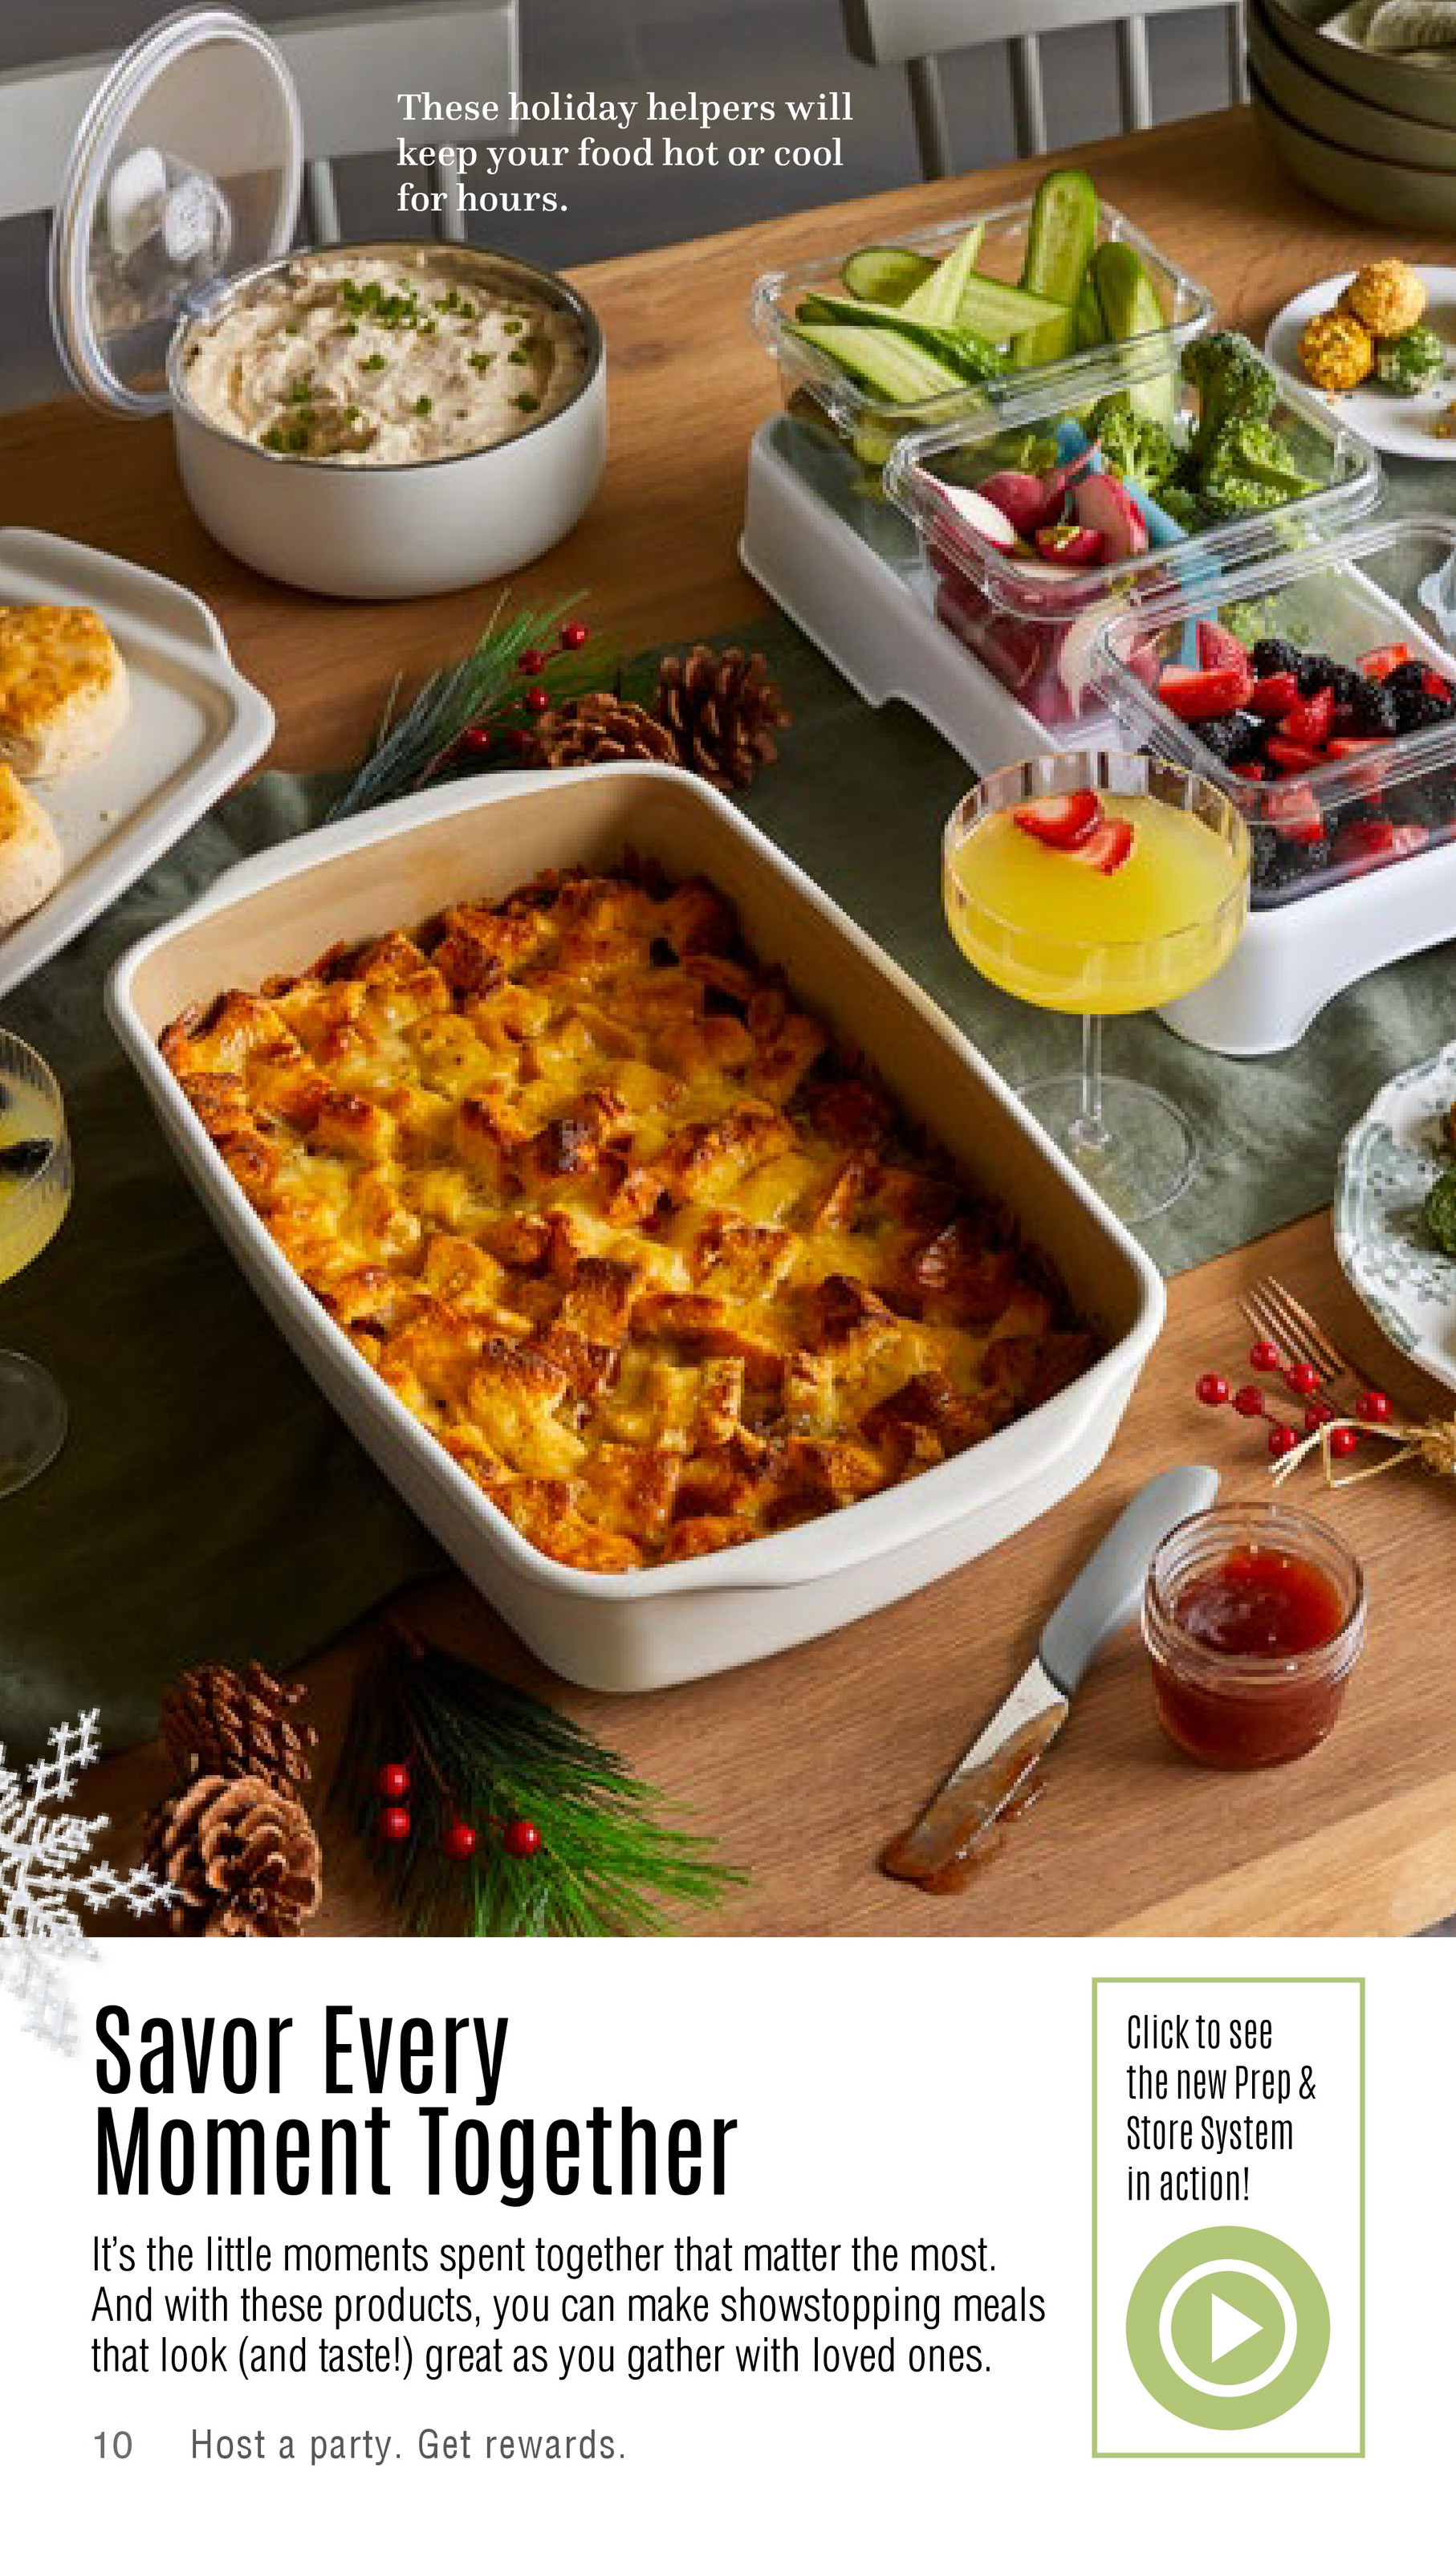 What the Fork - Pampered Chef Holiday Catalog - Page 1 - Created with  Publitas.com